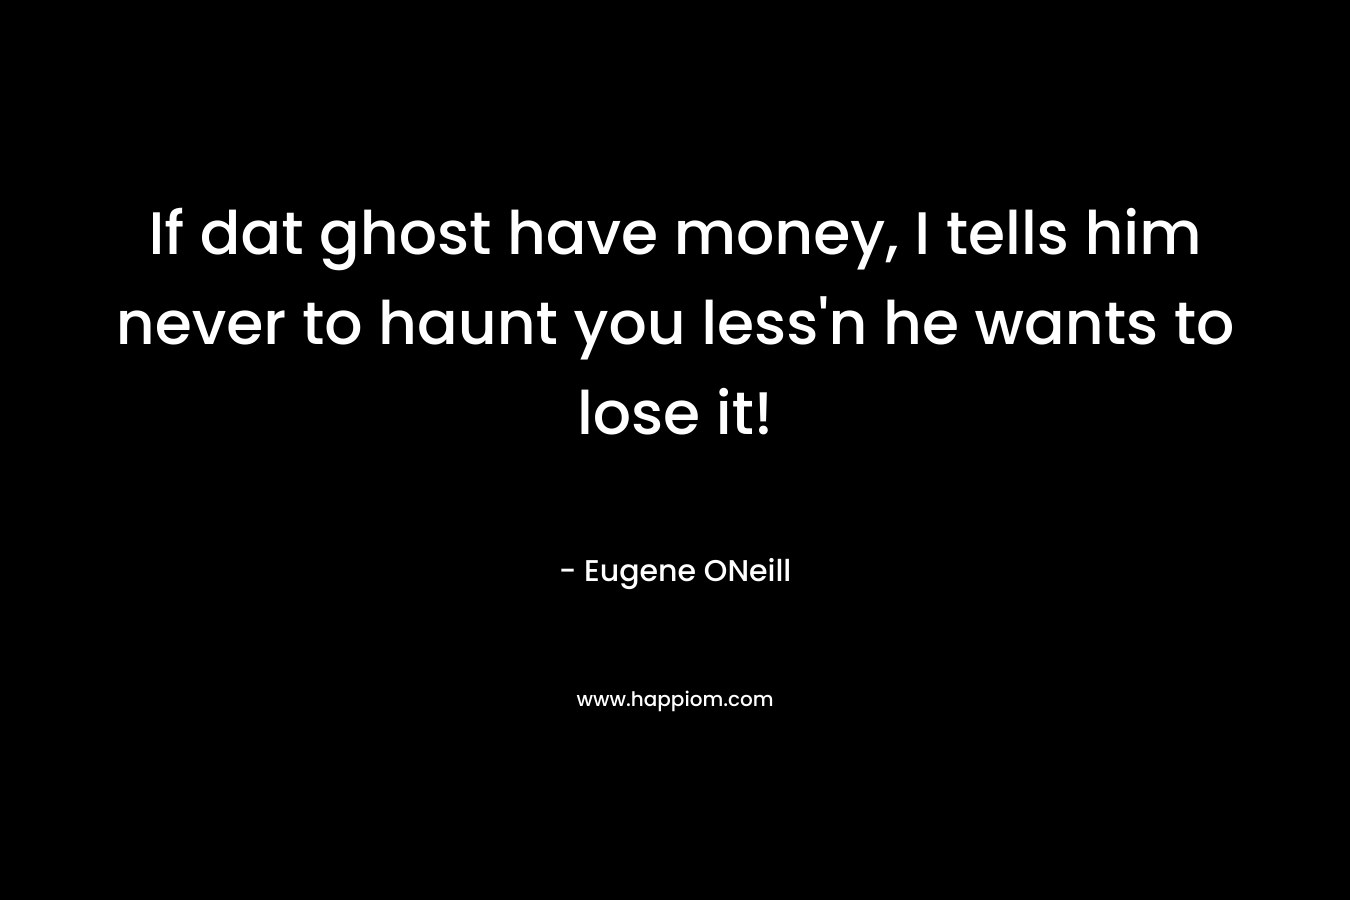 If dat ghost have money, I tells him never to haunt you less'n he wants to lose it!